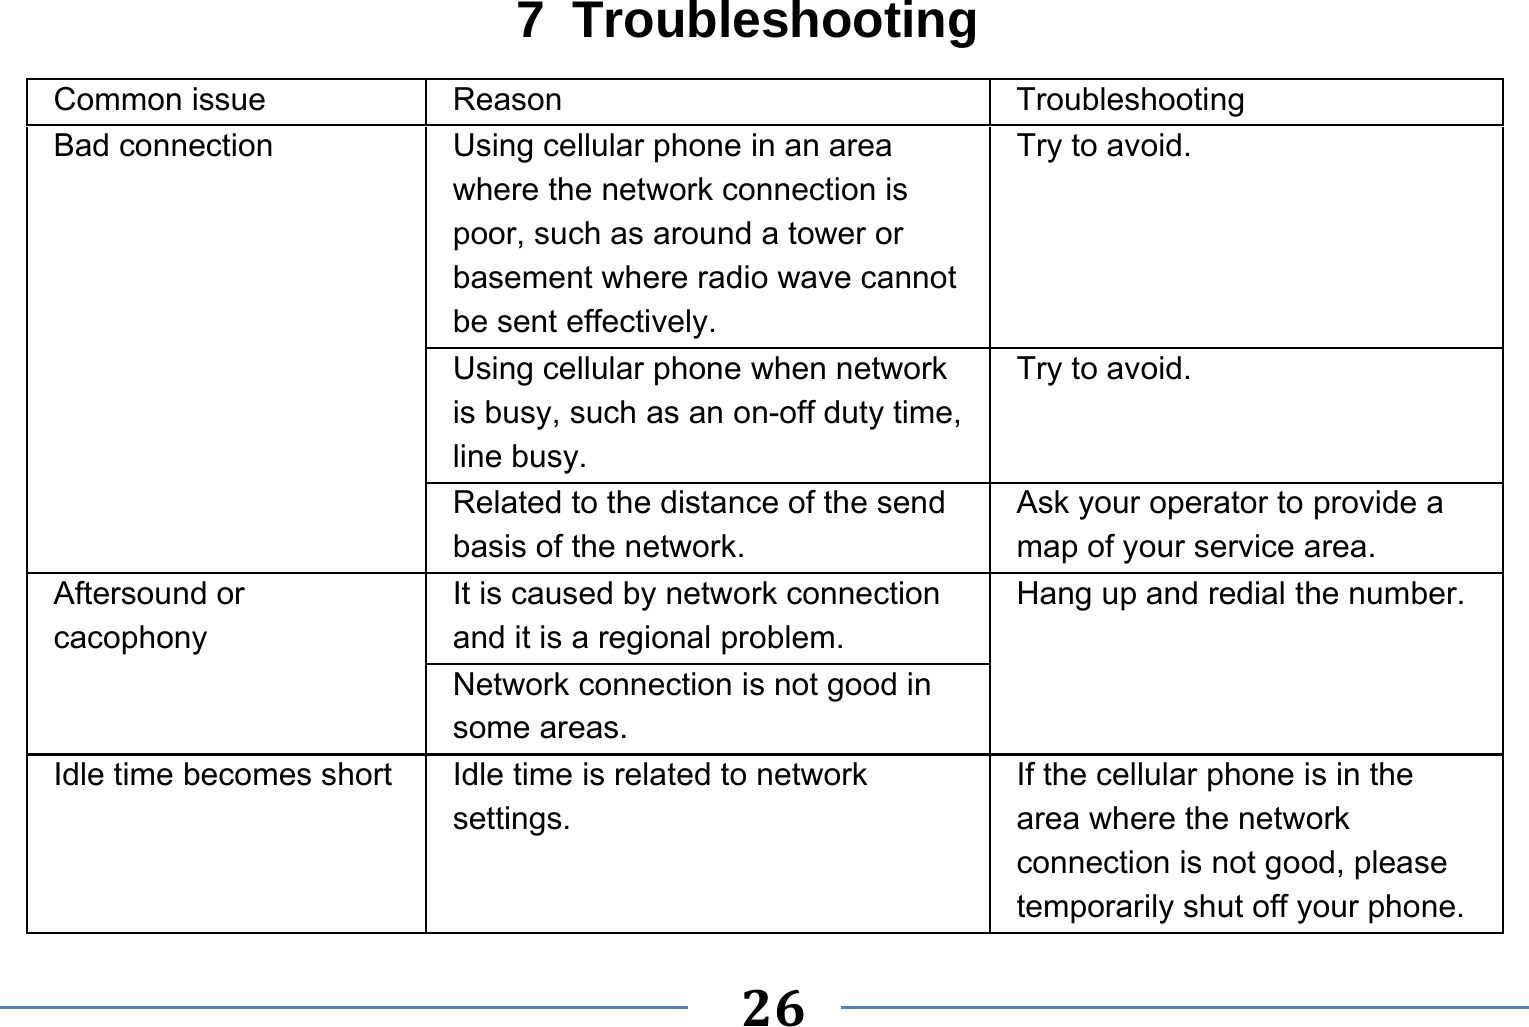   26   7 Troubleshooting Common issue  Reason  Troubleshooting Bad connection  Using cellular phone in an area where the network connection is poor, such as around a tower or basement where radio wave cannot be sent effectively.   Try to avoid. Using cellular phone when network is busy, such as an on-off duty time, line busy. Try to avoid. Related to the distance of the send basis of the network. Ask your operator to provide a map of your service area. Aftersound or cacophony It is caused by network connection and it is a regional problem. Hang up and redial the number. Network connection is not good in some areas. Idle time becomes short  Idle time is related to network settings. If the cellular phone is in the area where the network connection is not good, please temporarily shut off your phone. 